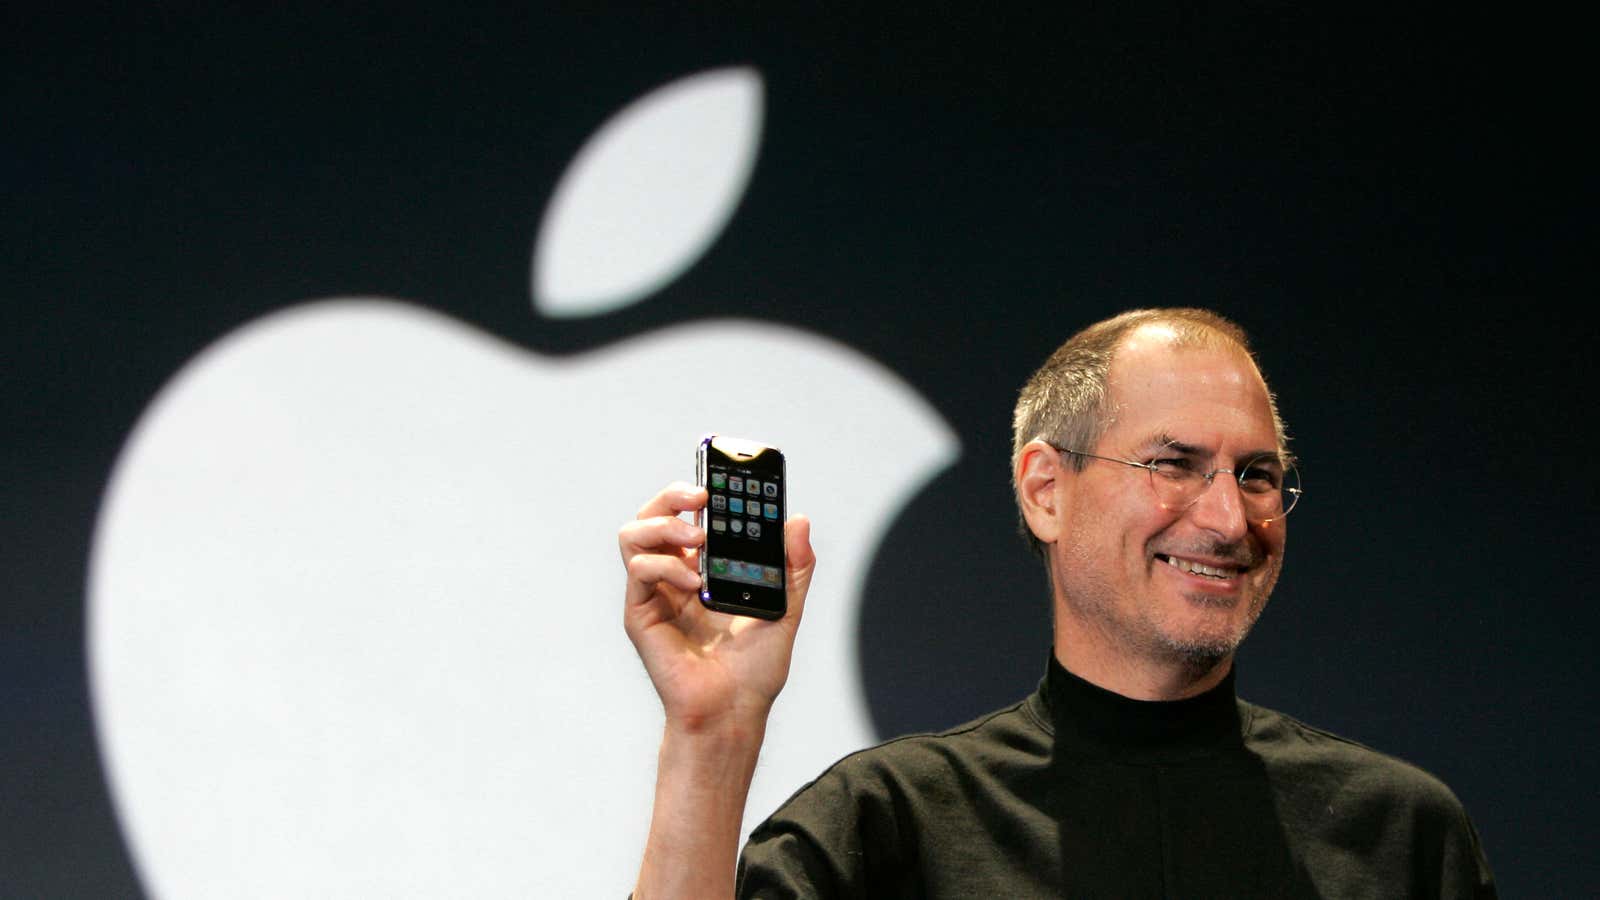 Former CEO Steve Jobs unveiling the original iPhone in January, 2007.